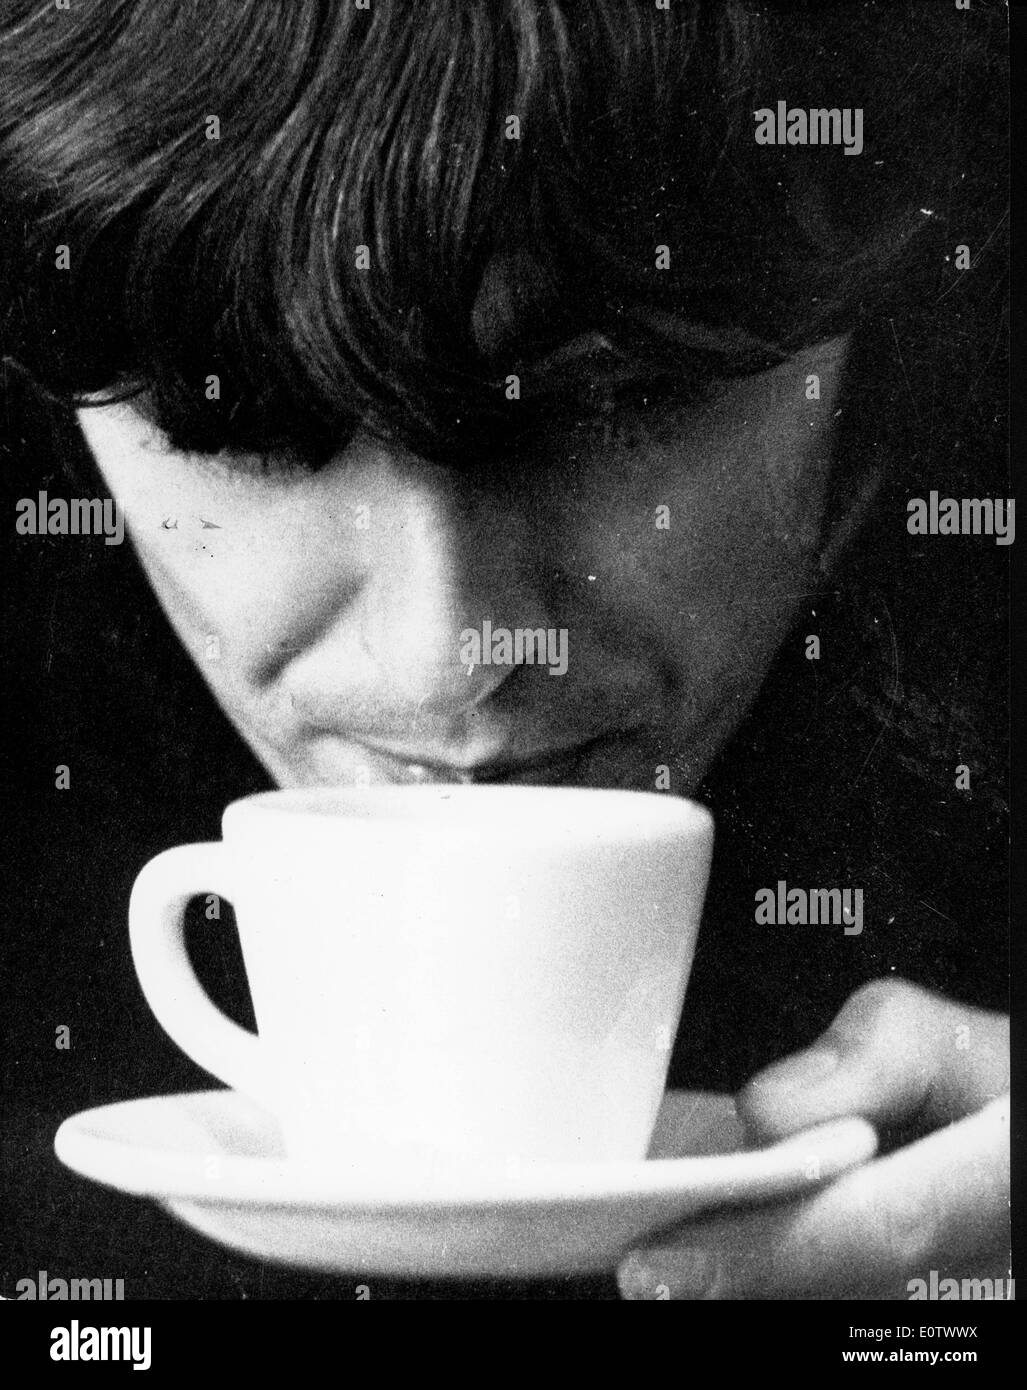 Beatle guitarist George Harrison cooling his cup of coffee Stock Photo